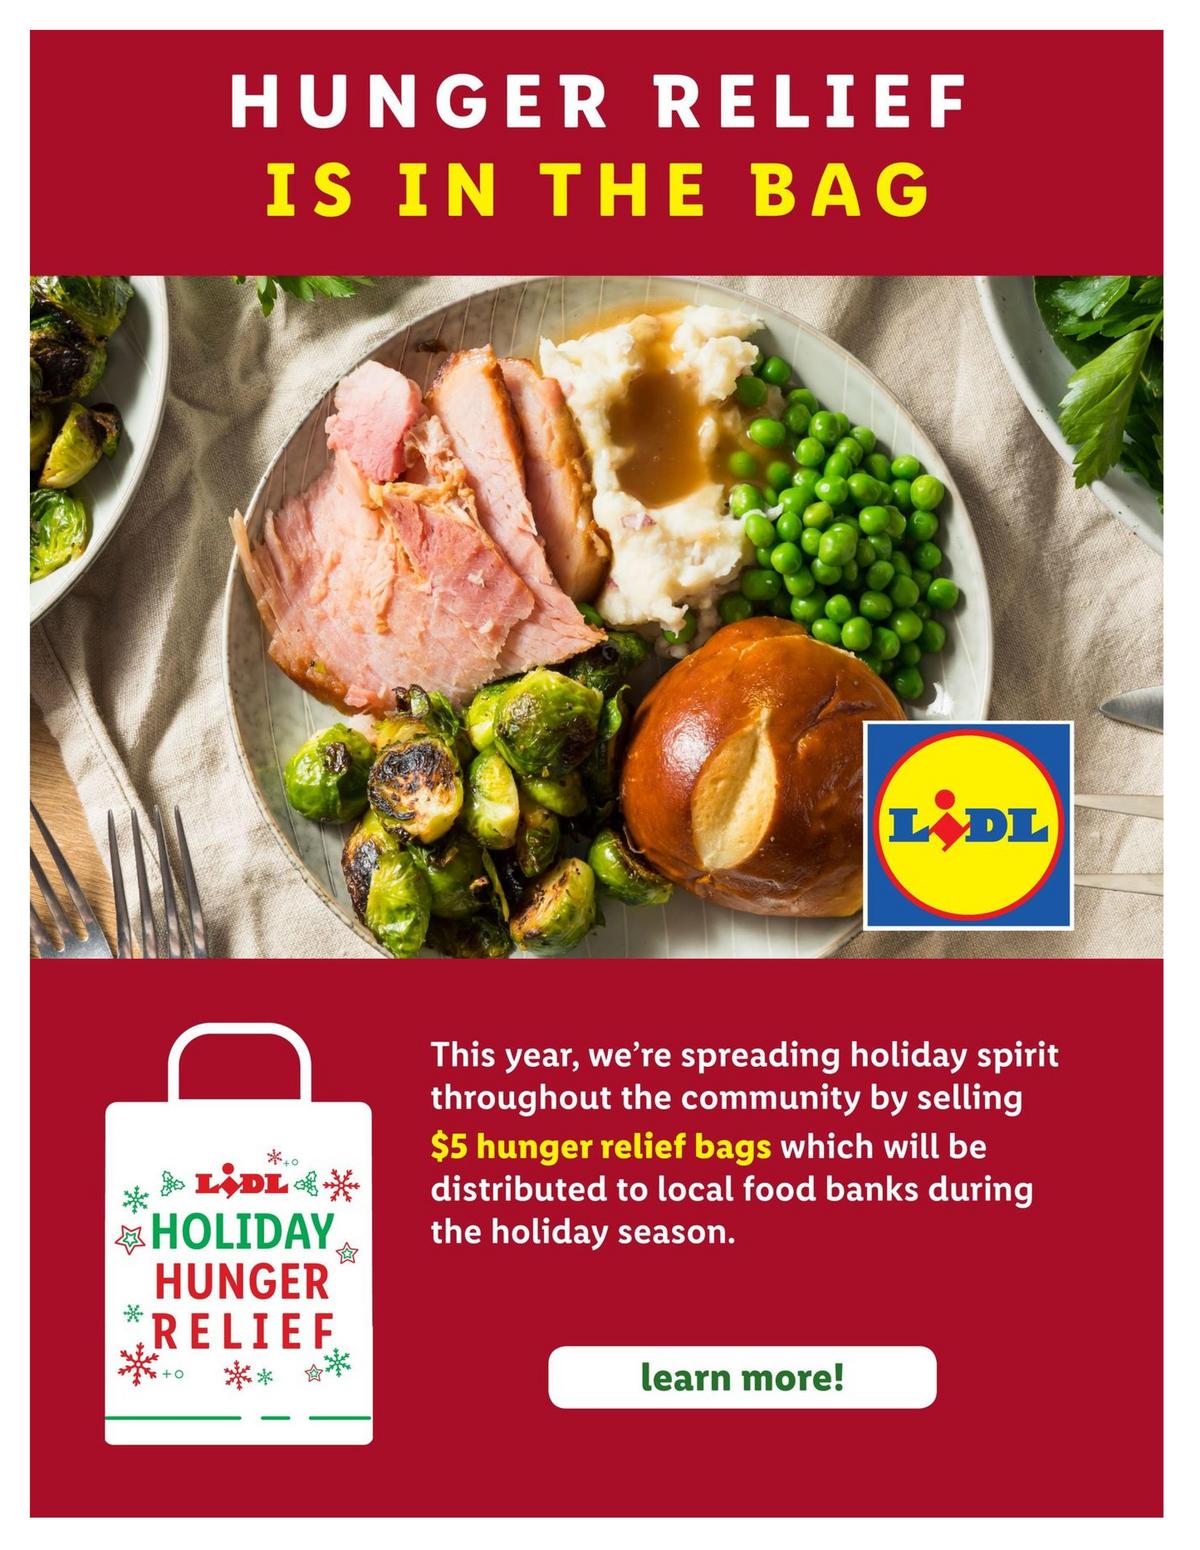 LIDL Magazine Weekly Ad from November 25